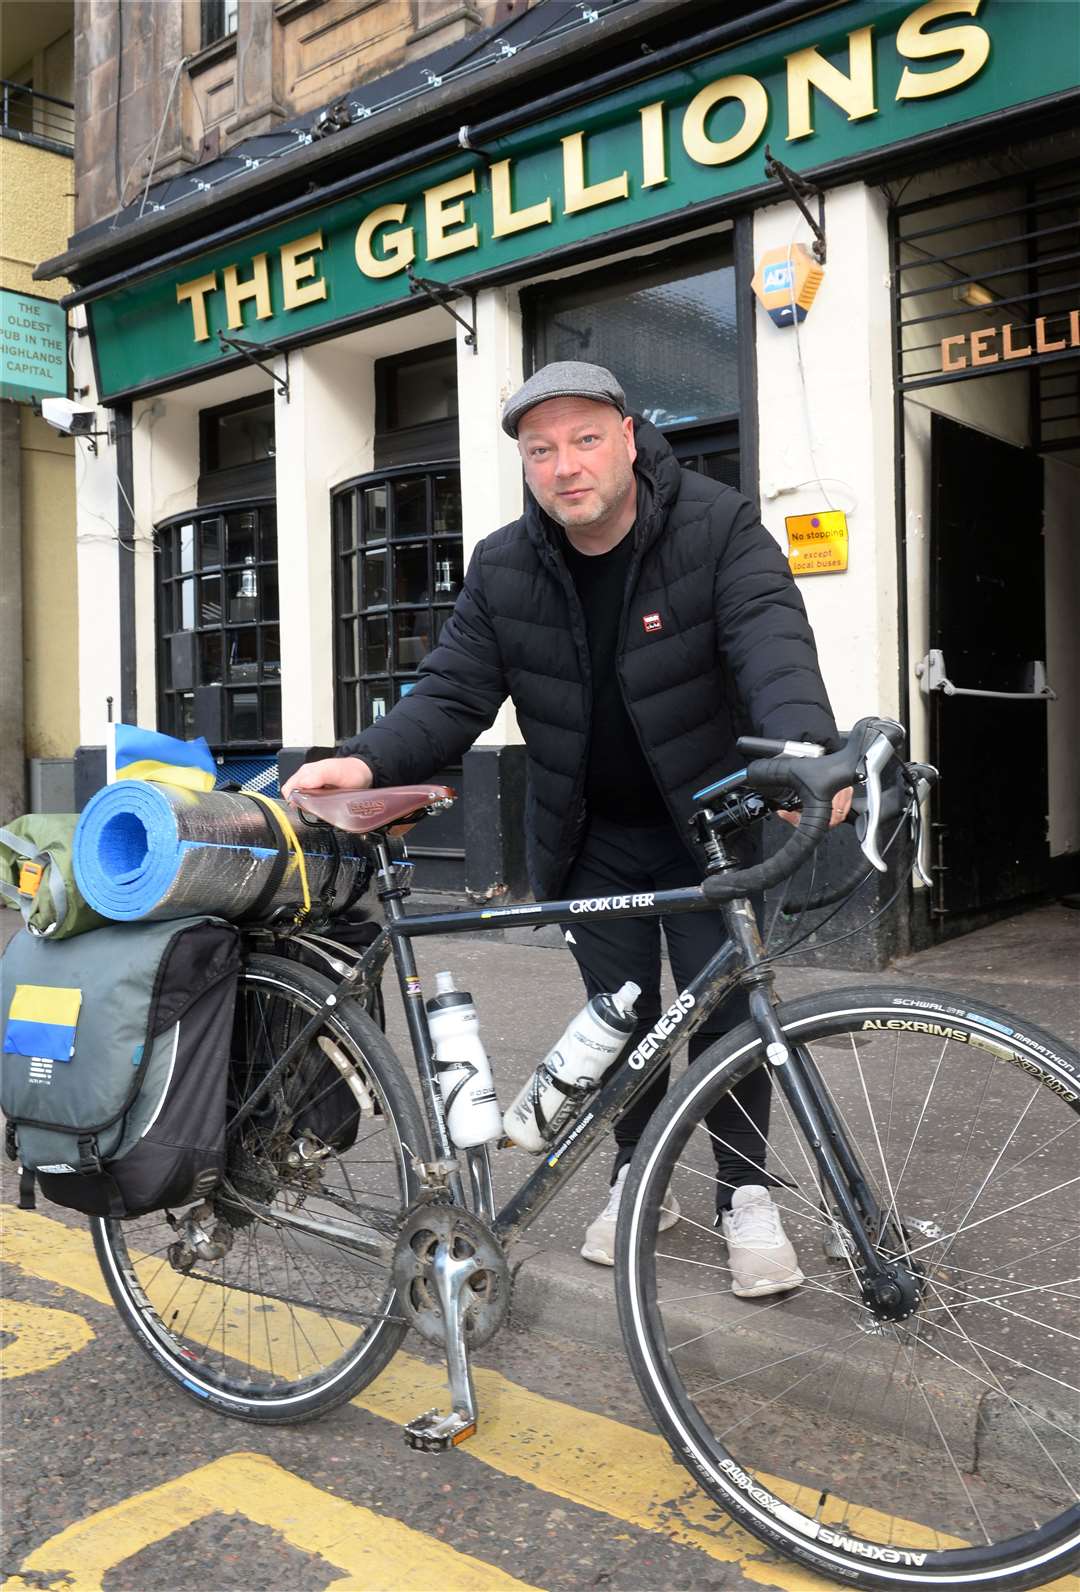 Alasdair Fraser before setting up his fundraising bike trip from Gdansk to Gellions for Urkraine.  Photo: Gary Anthony